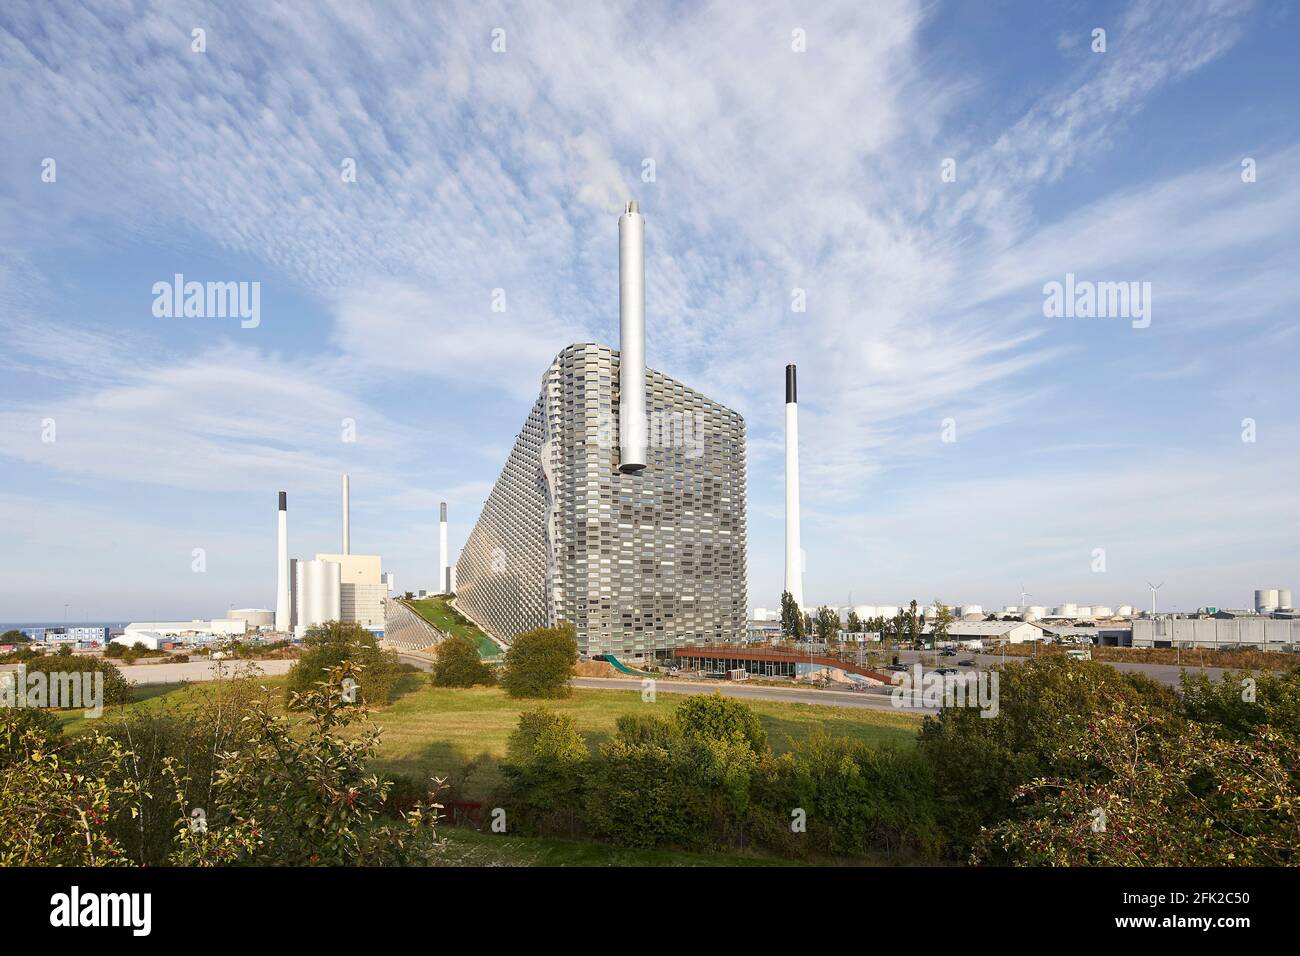 Power plant with context in green. CoppenHill Power Plant, Copenhagen, Denmark. Architect: BIG Bjarke Ingels Group, 2019. Stock Photo